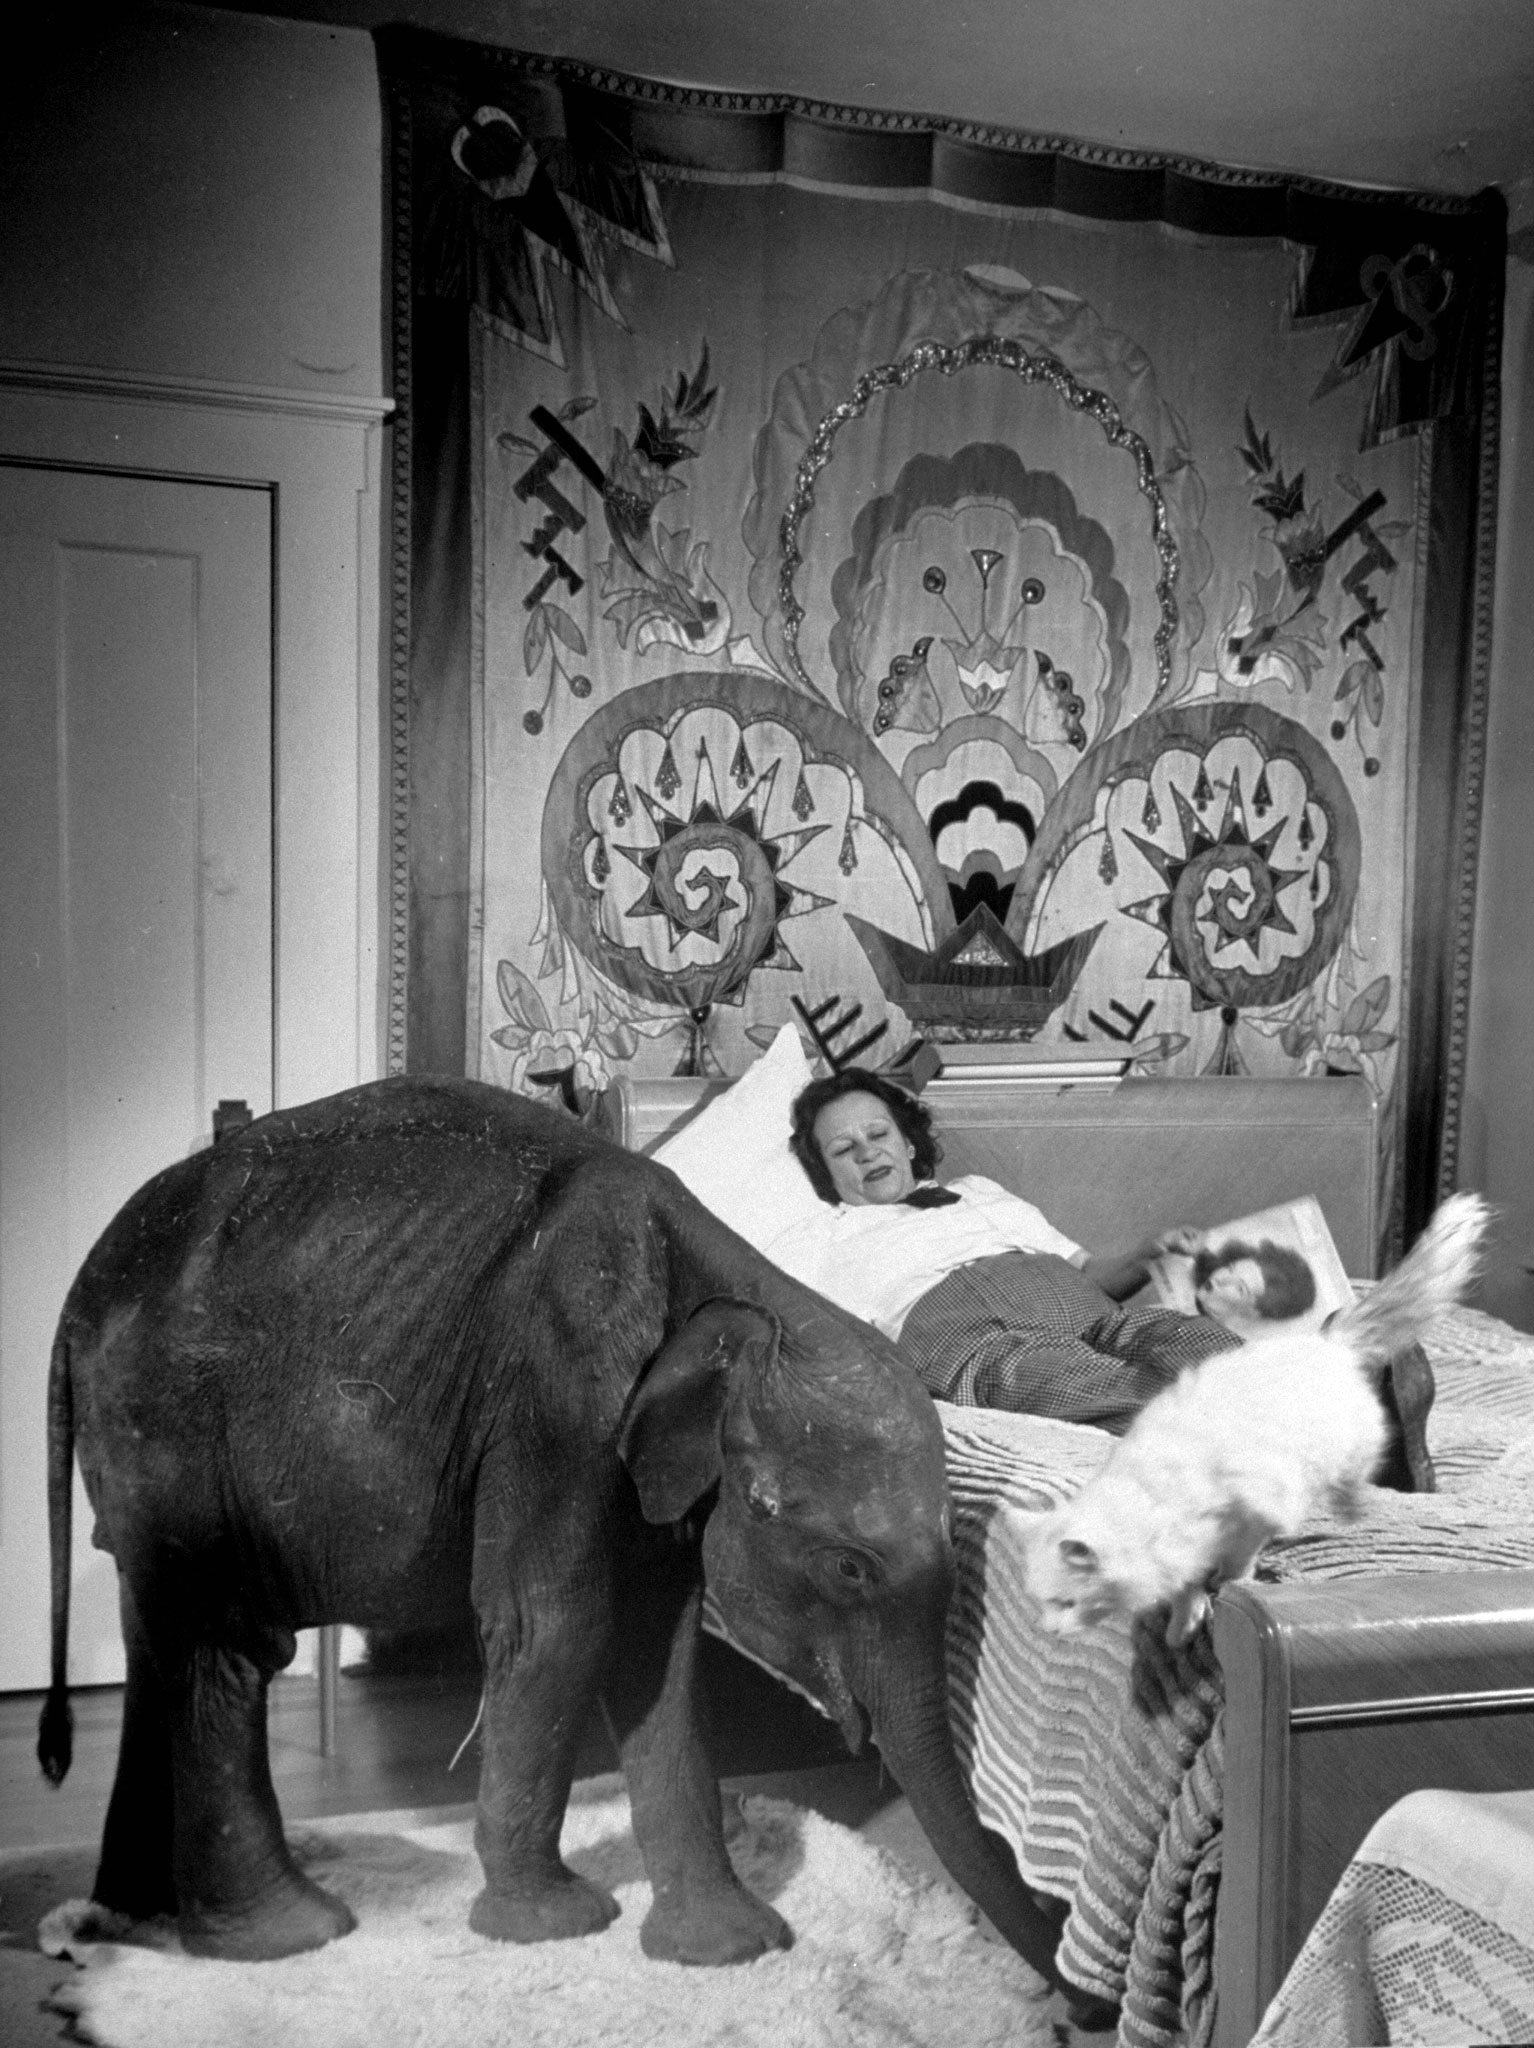 "Butch", baby female Indian elephant in the Dailey Circus, making herself one of the family in the Davenport household. The Davenports own the circus.